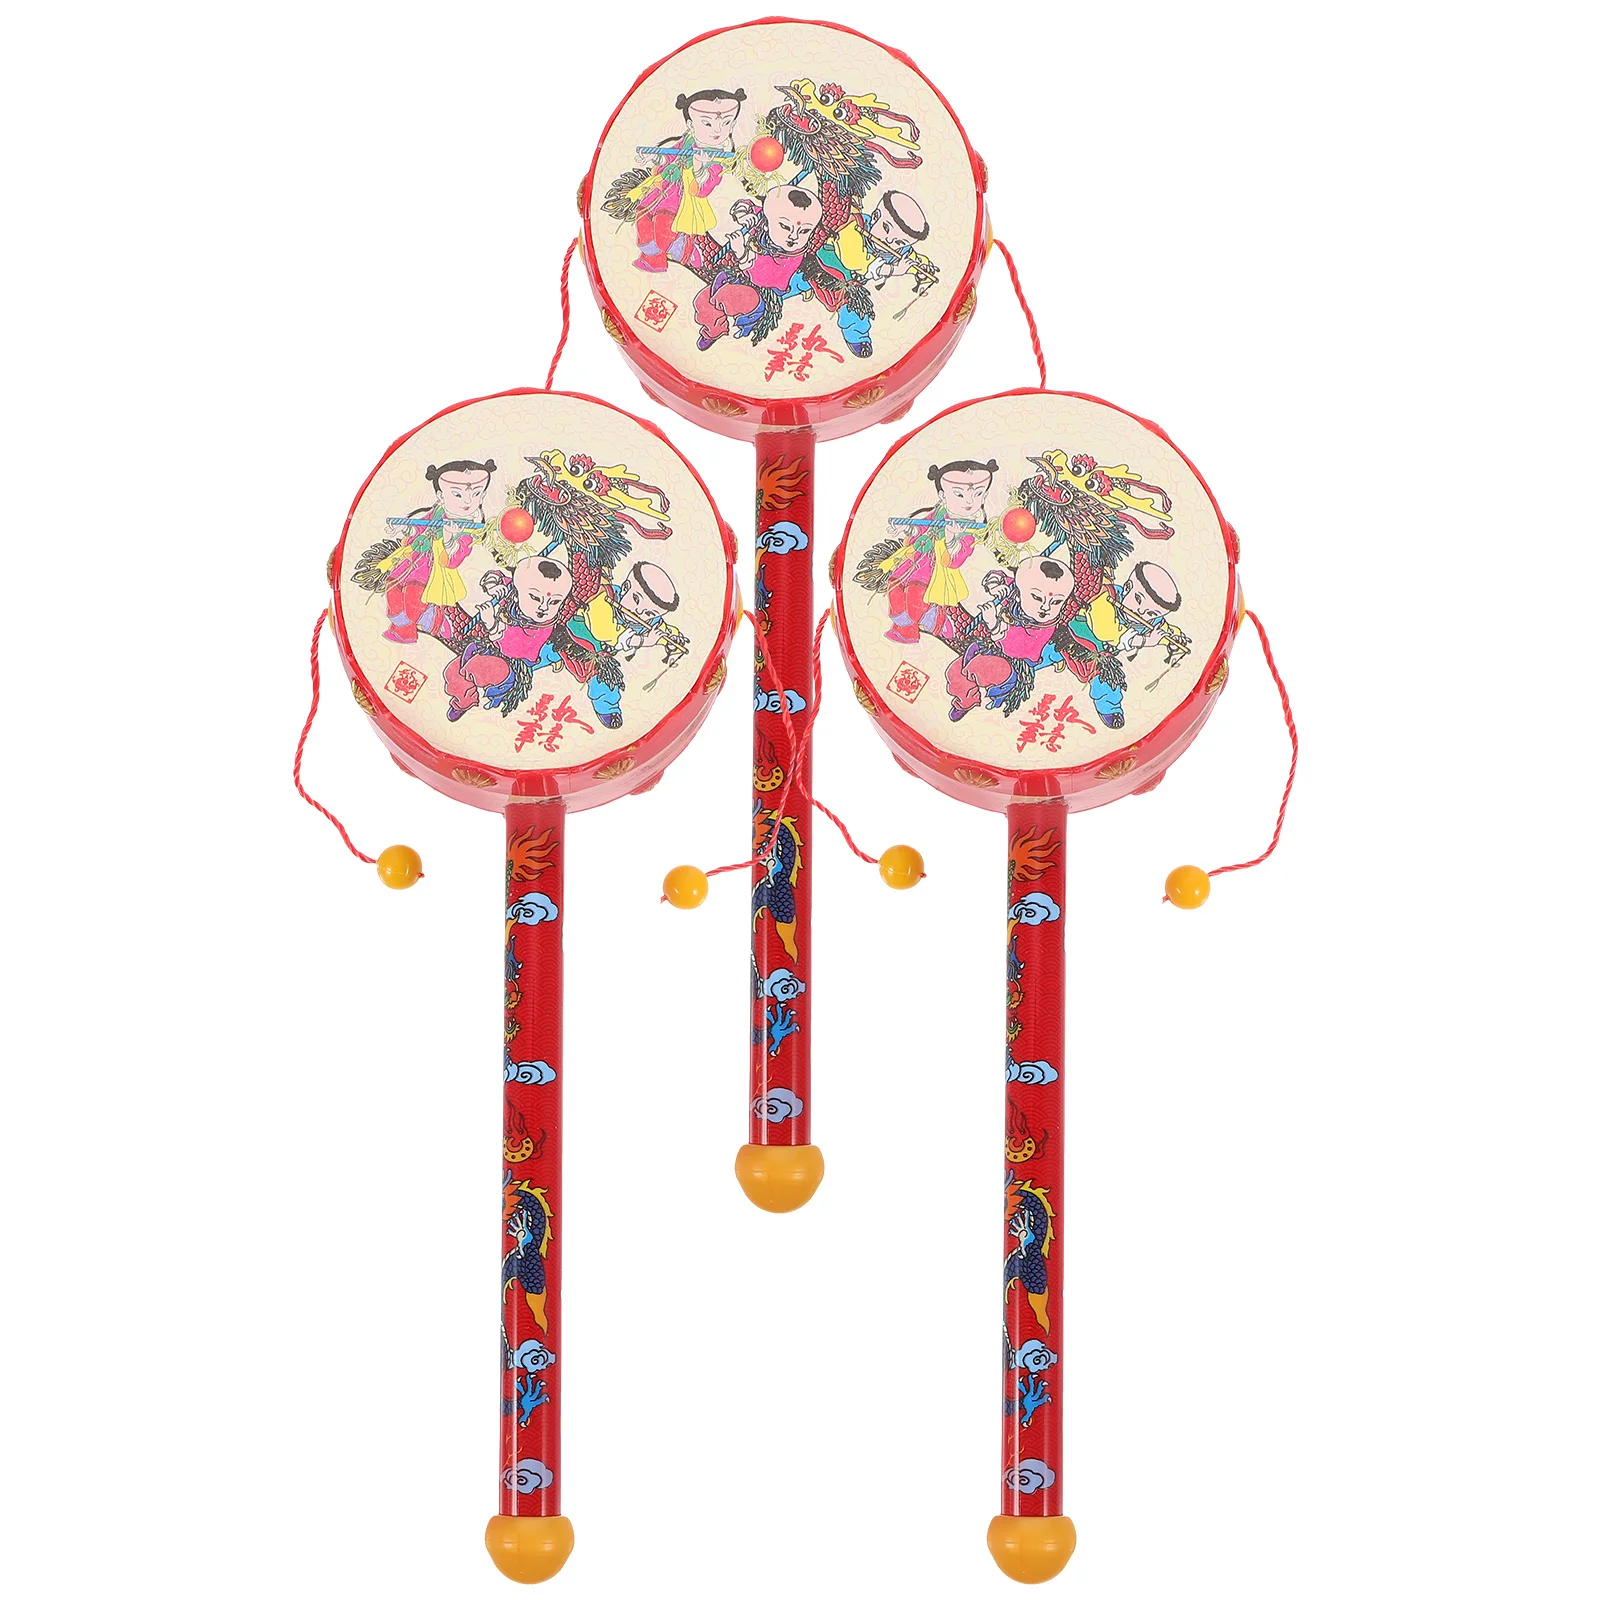 

3pcs 19cm -drums Chinese Style Balance Drum Shaker Percussion Musical Instrument Toy for Baby (Random Pattern)